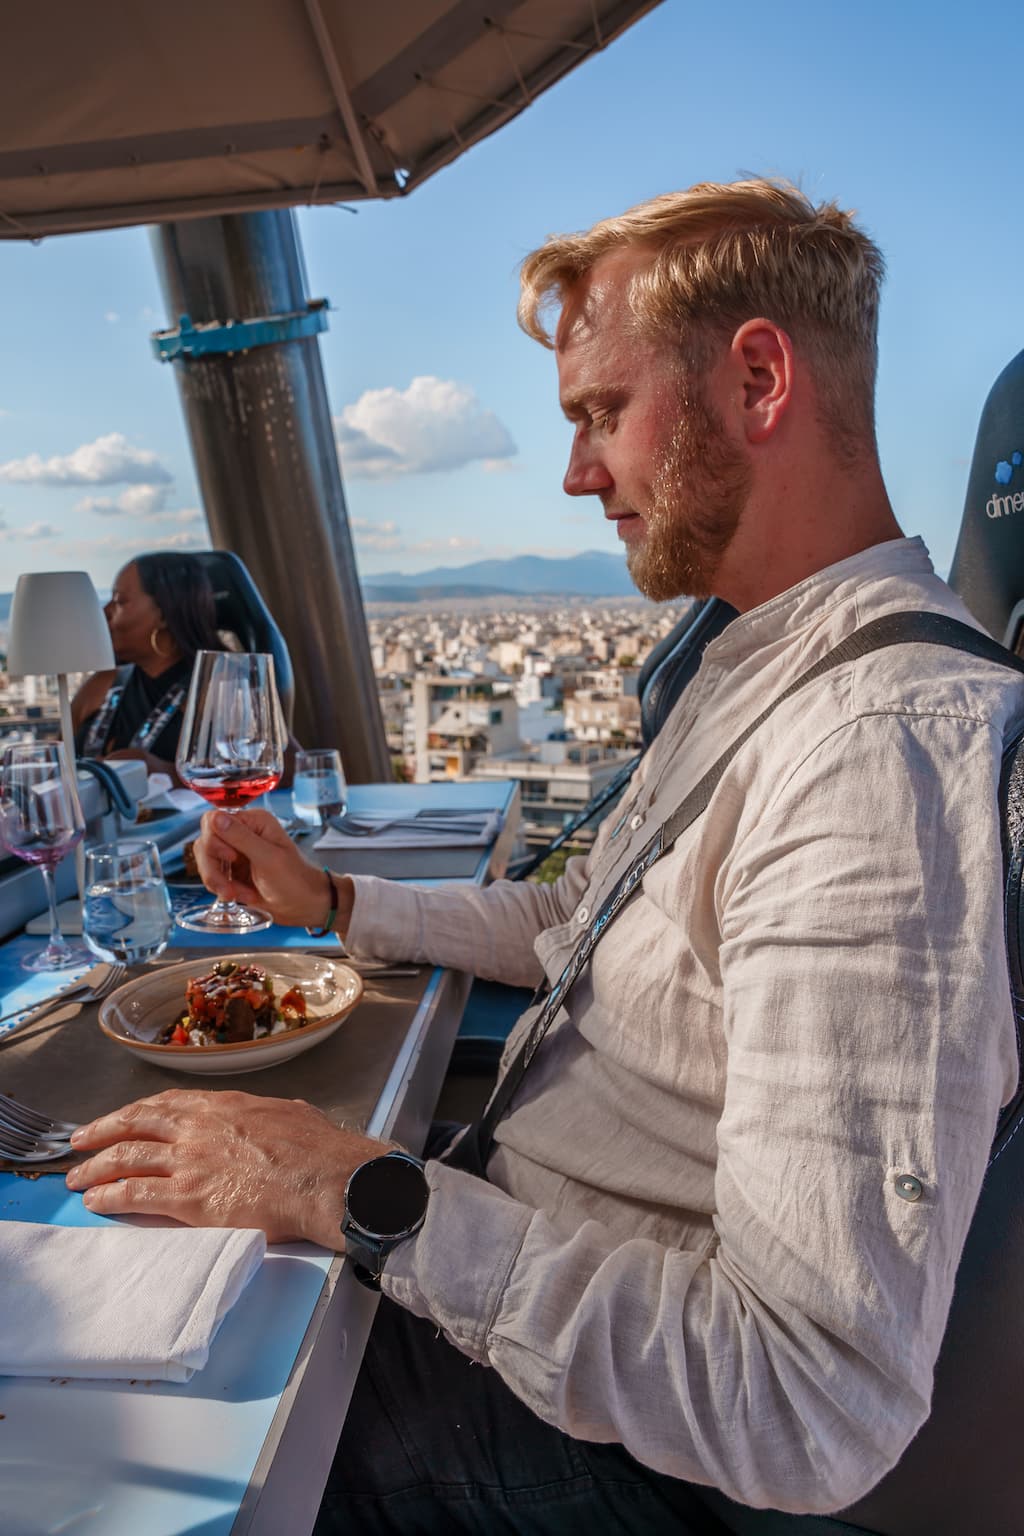 Dinner in the sky Athens photos.